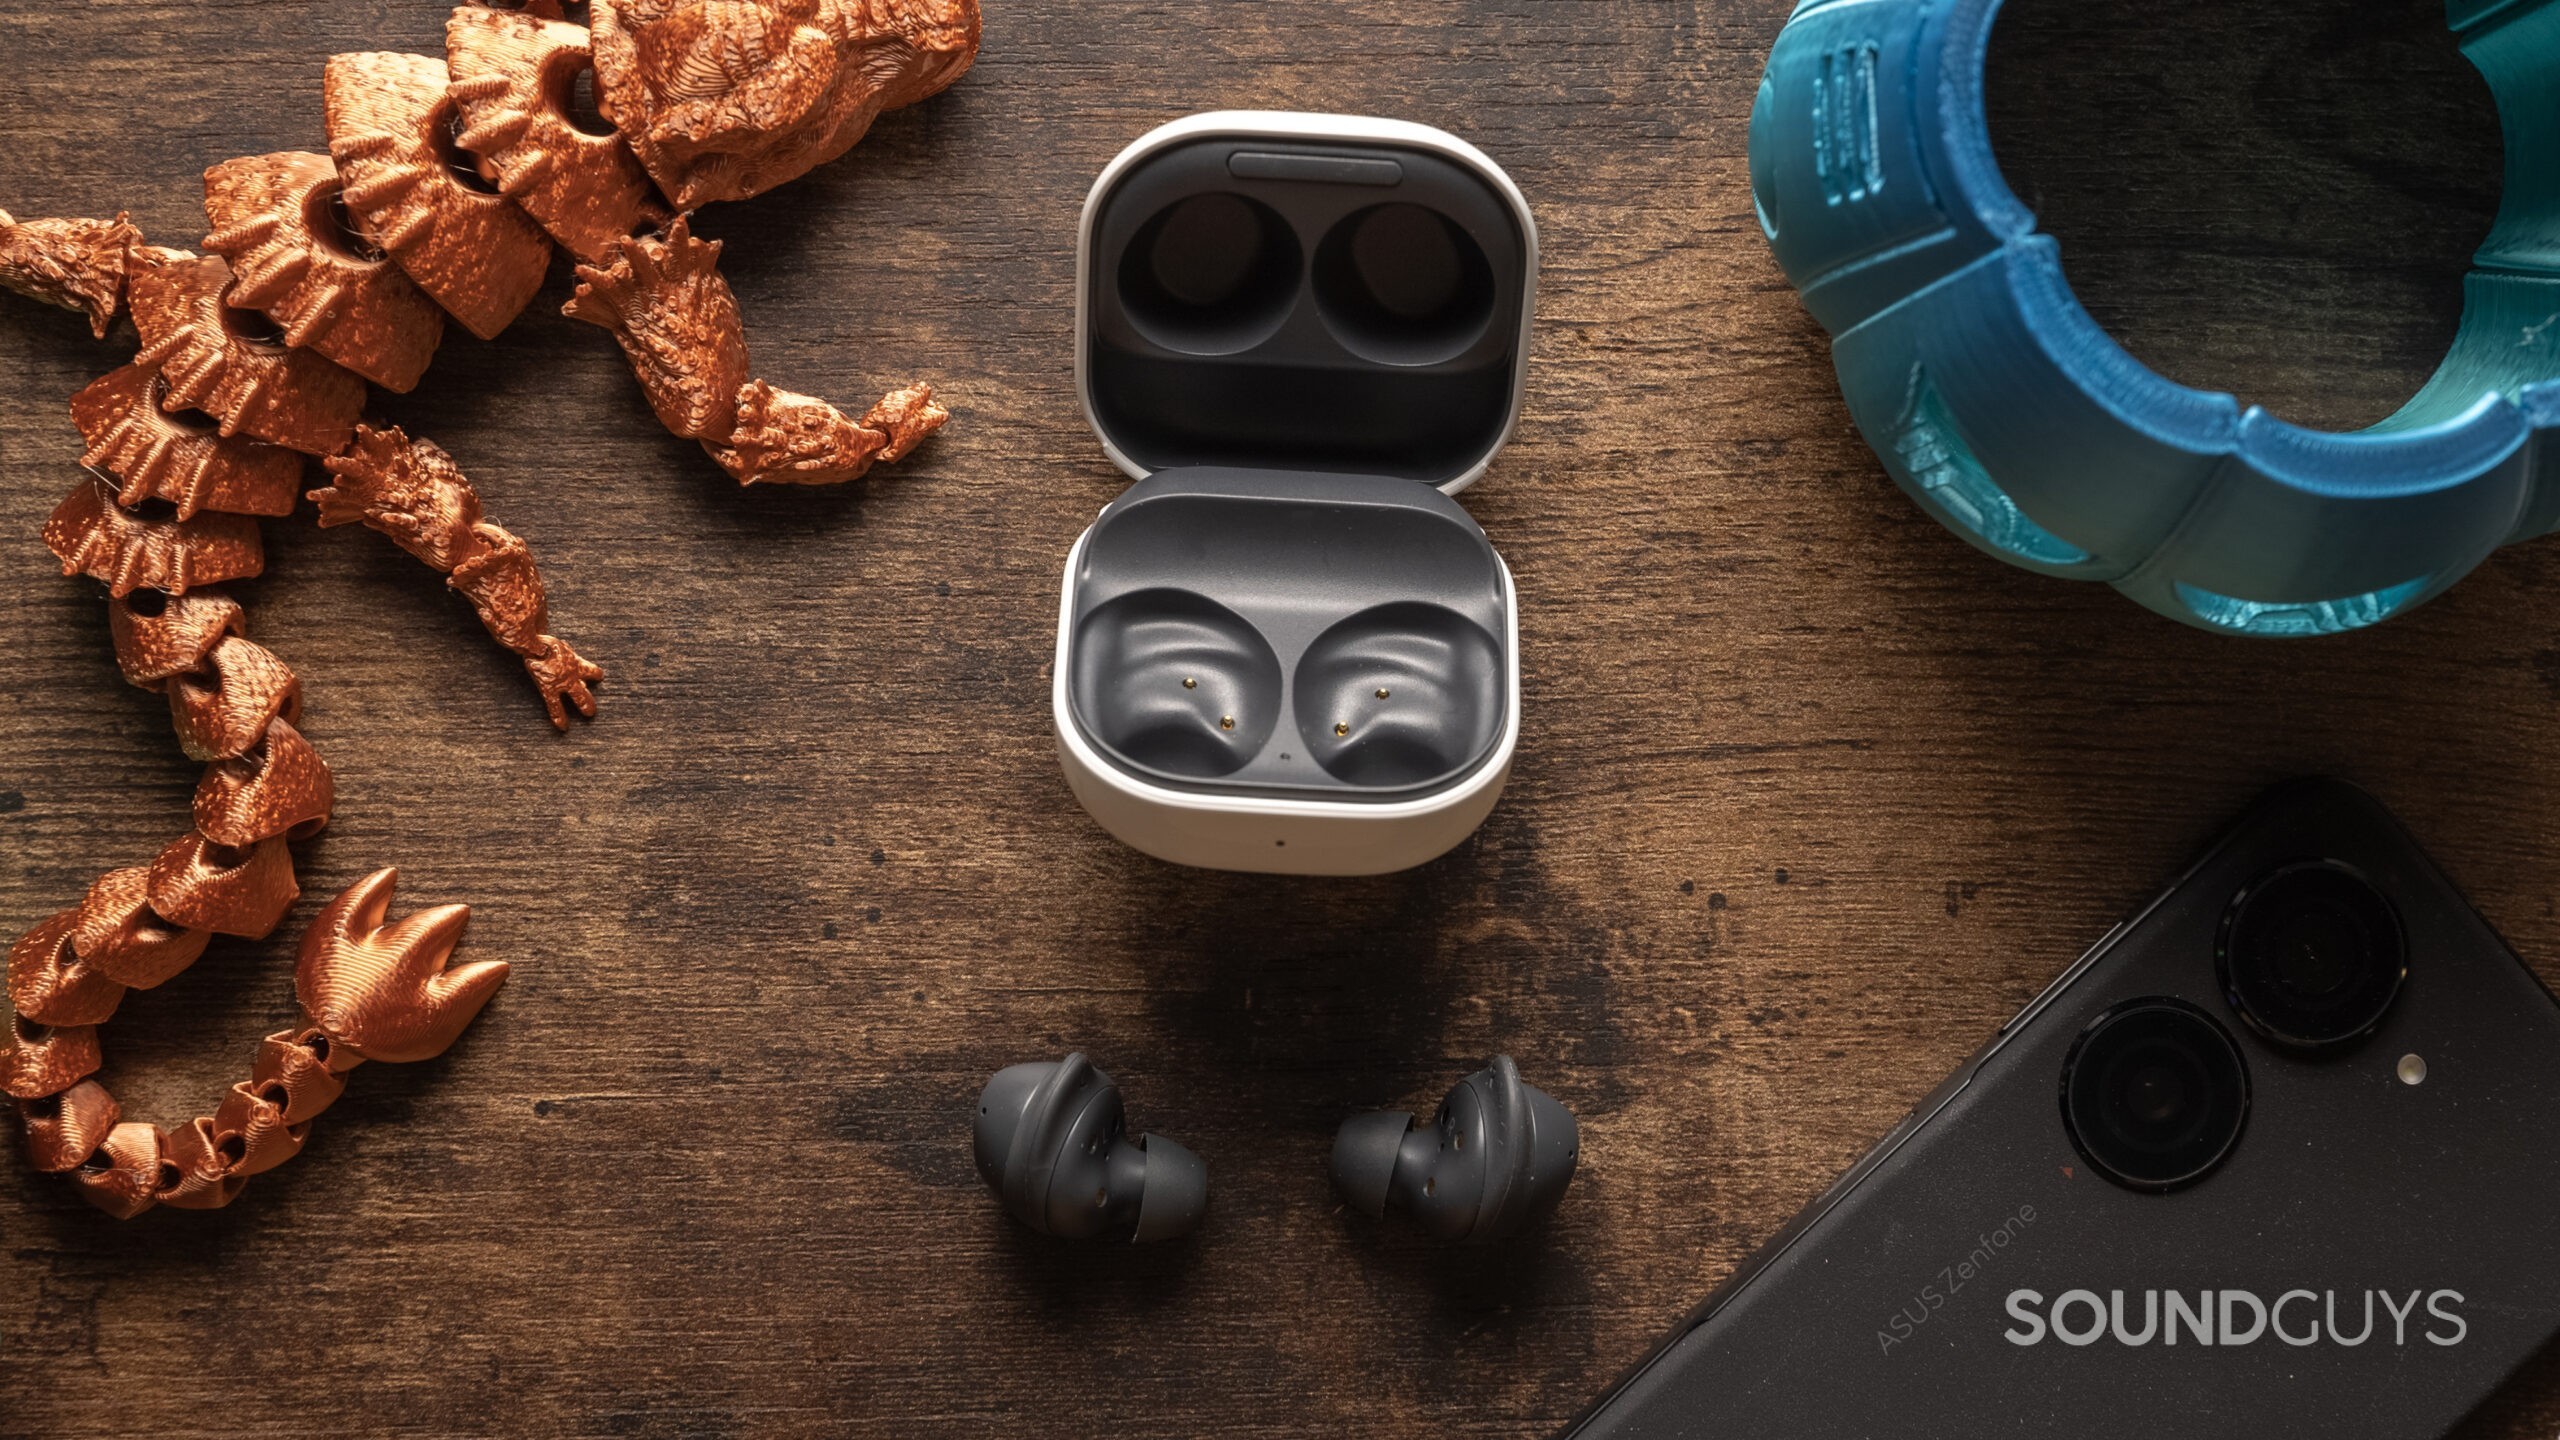 The Samsung Galaxy Buds FE have a tiny charging case.